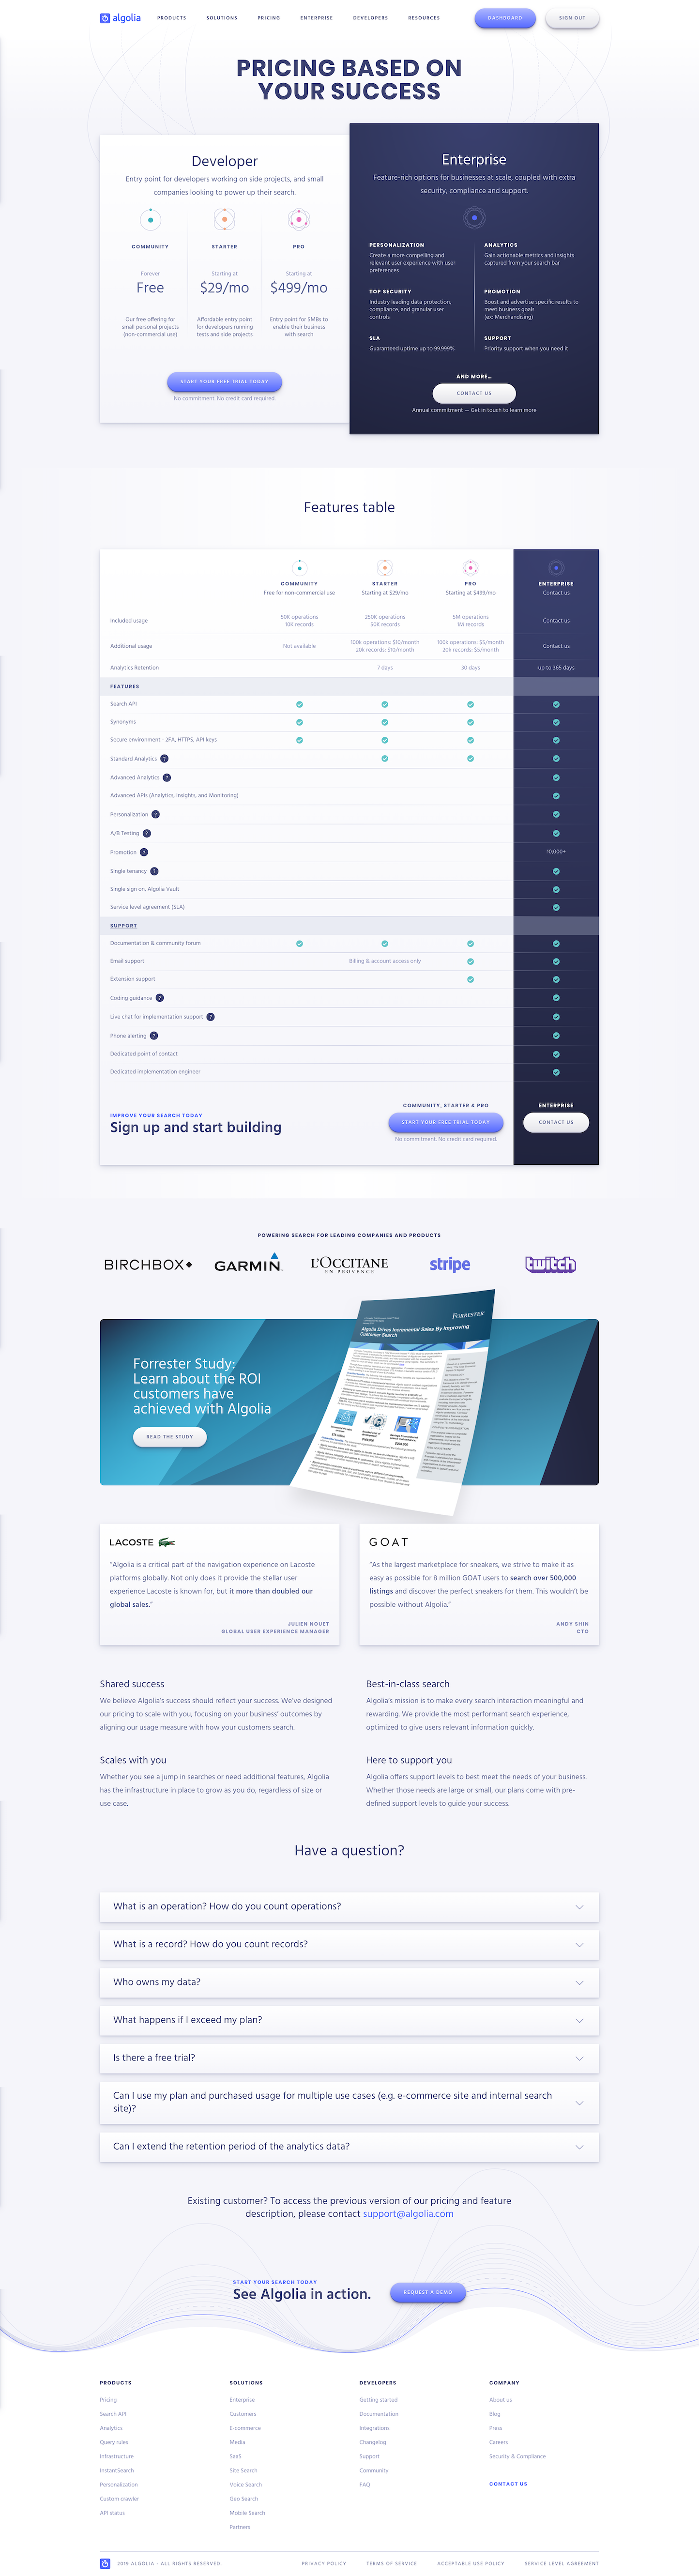 Screenshot of the Pricing page from the Algolia website.